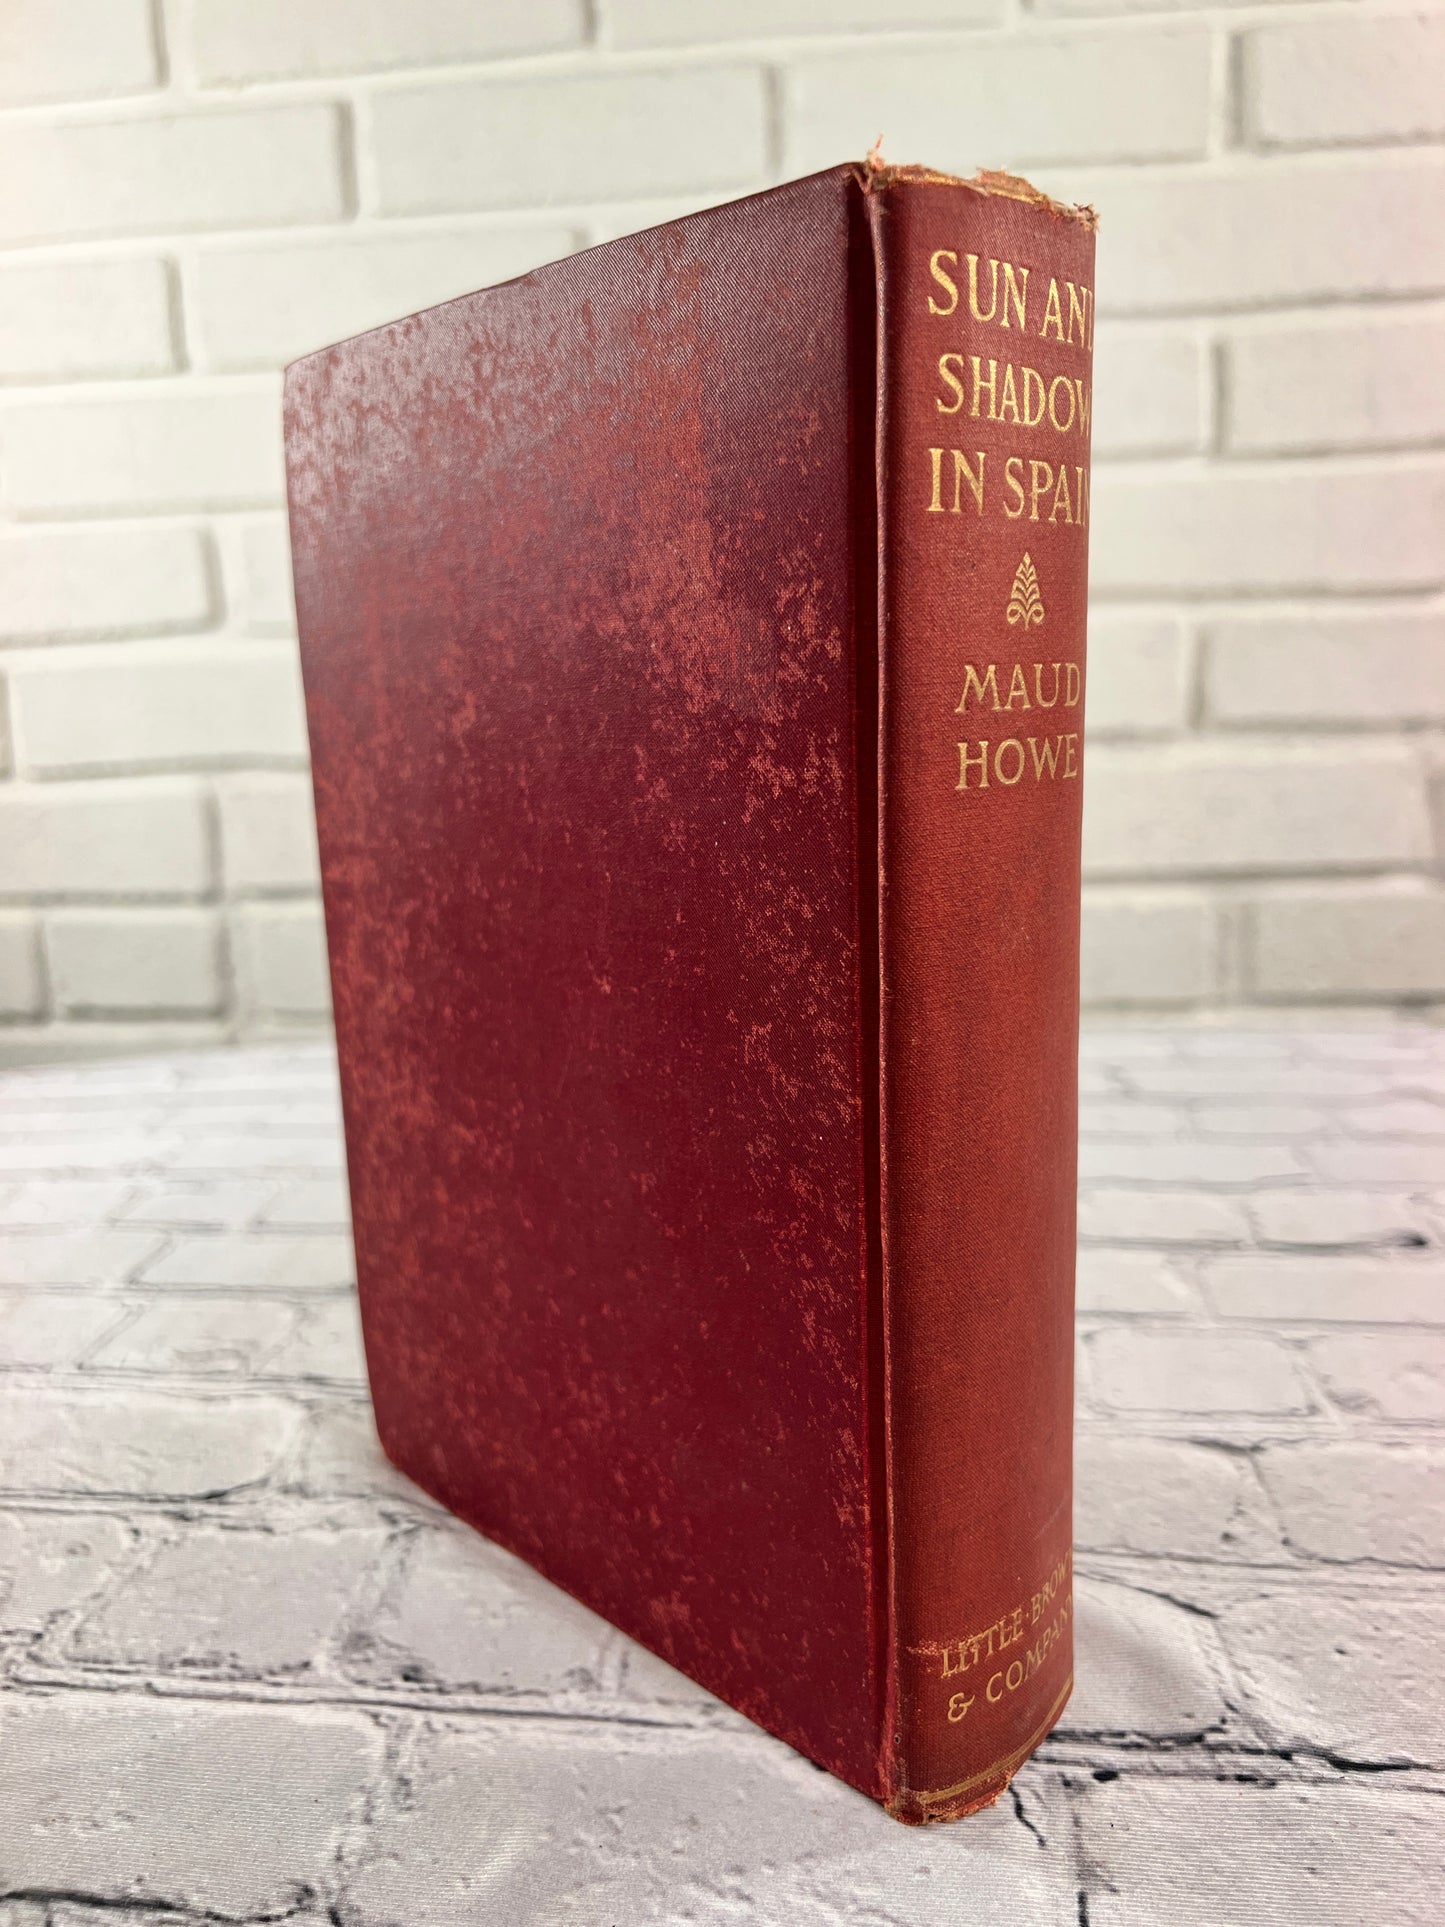 Sun and Shadow in Spain by Maud Howe [1st Edition · 1908]